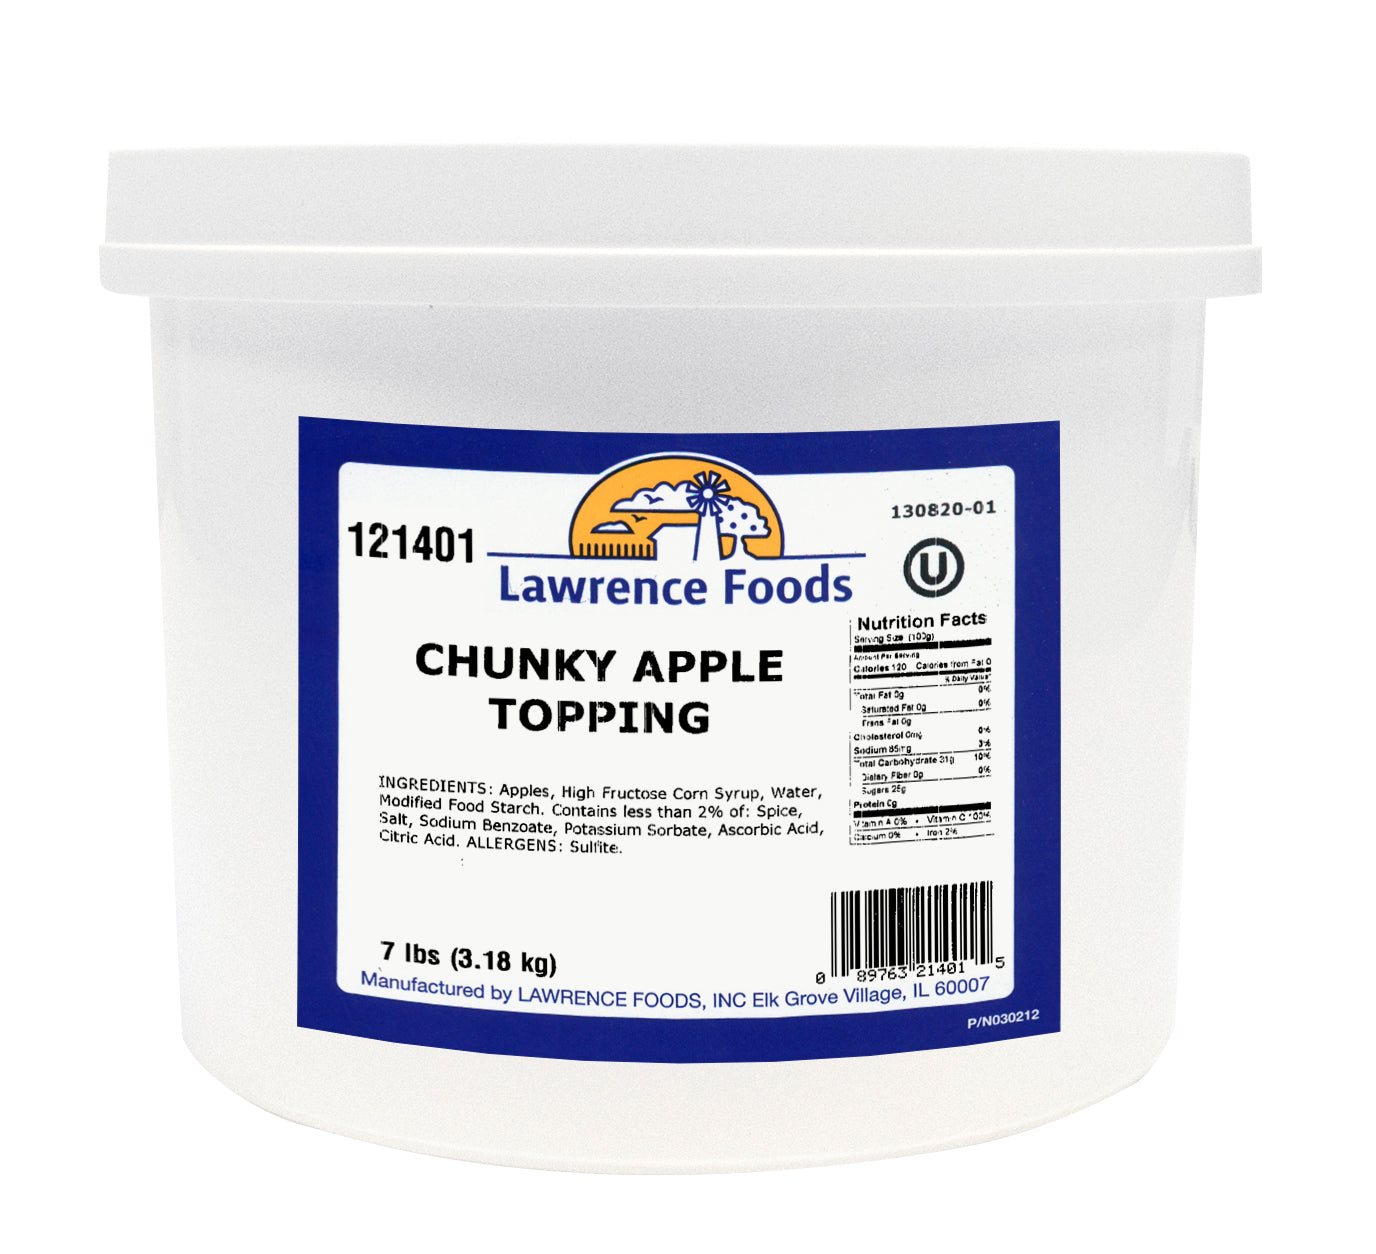 CHUNKY APPLE TOPPING